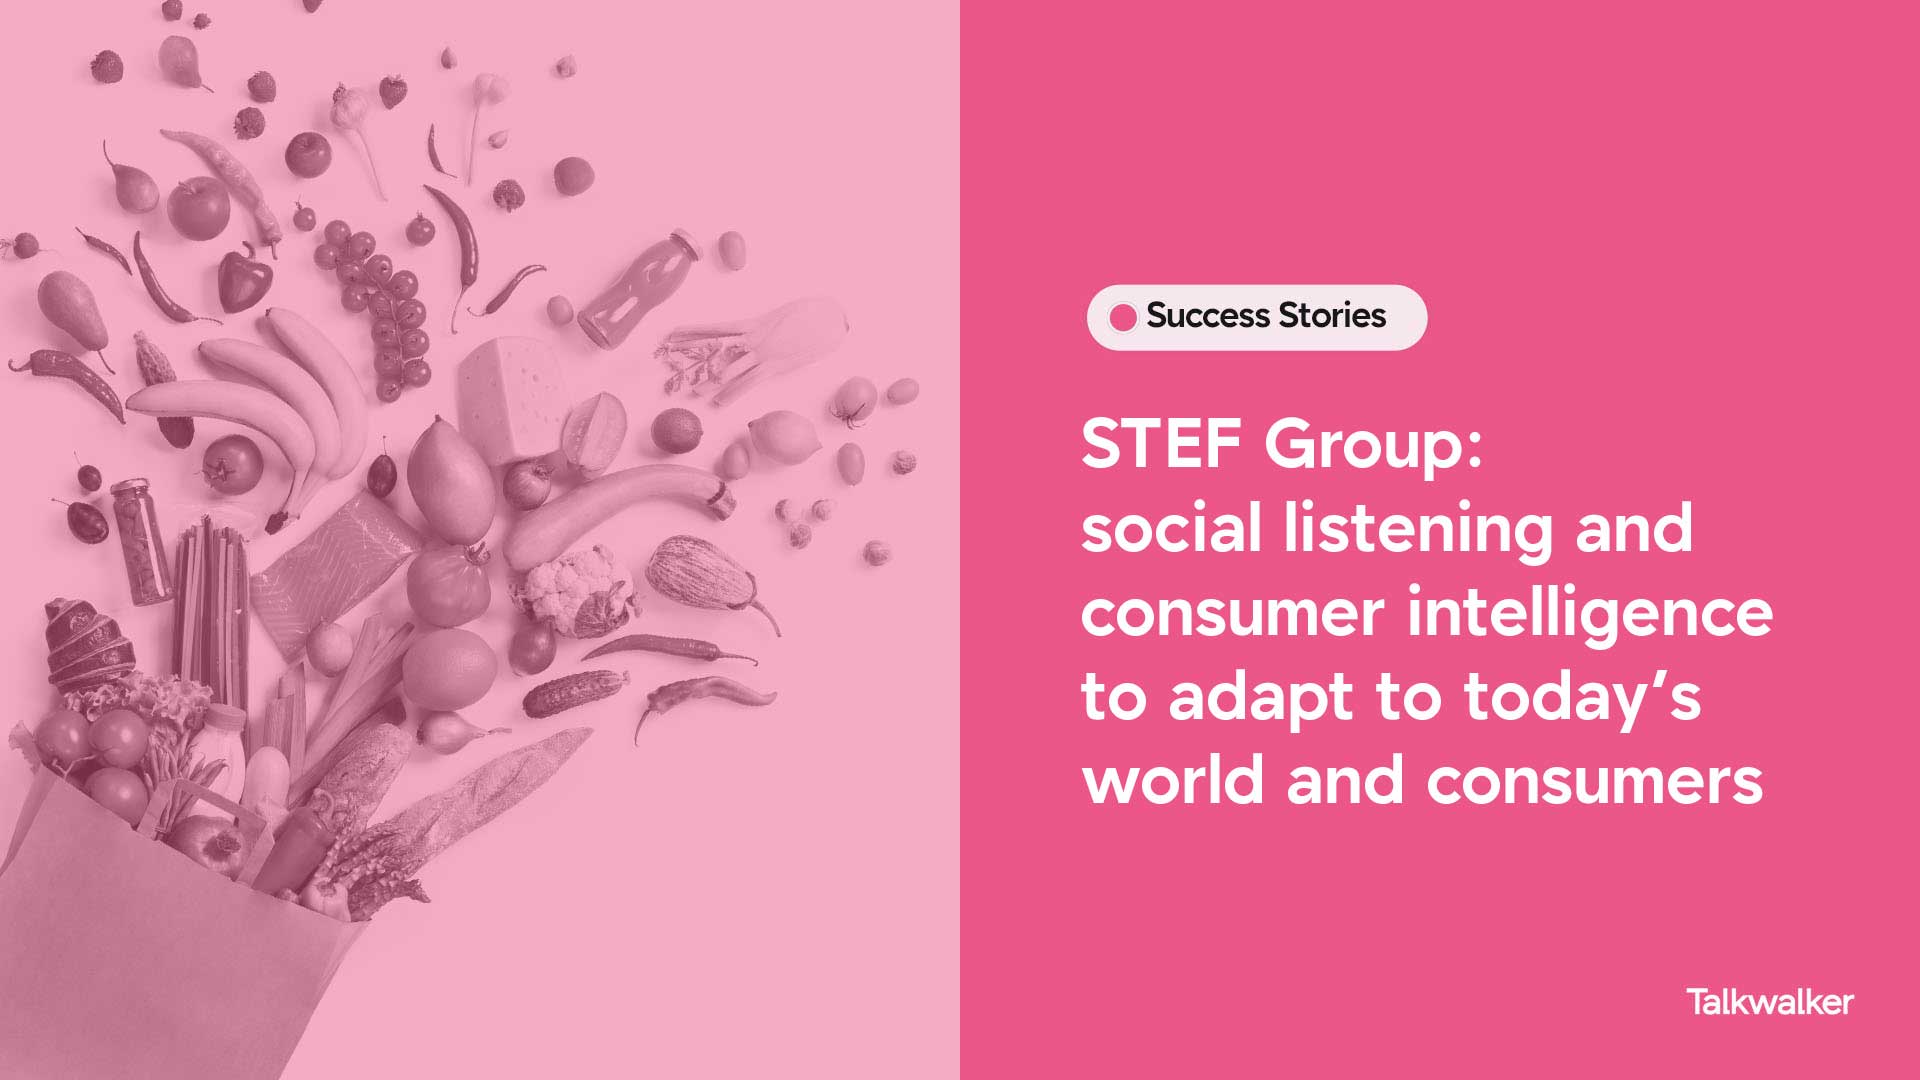 STEF Group: social listening and consumer intelligence to adapt to today's world and consumers